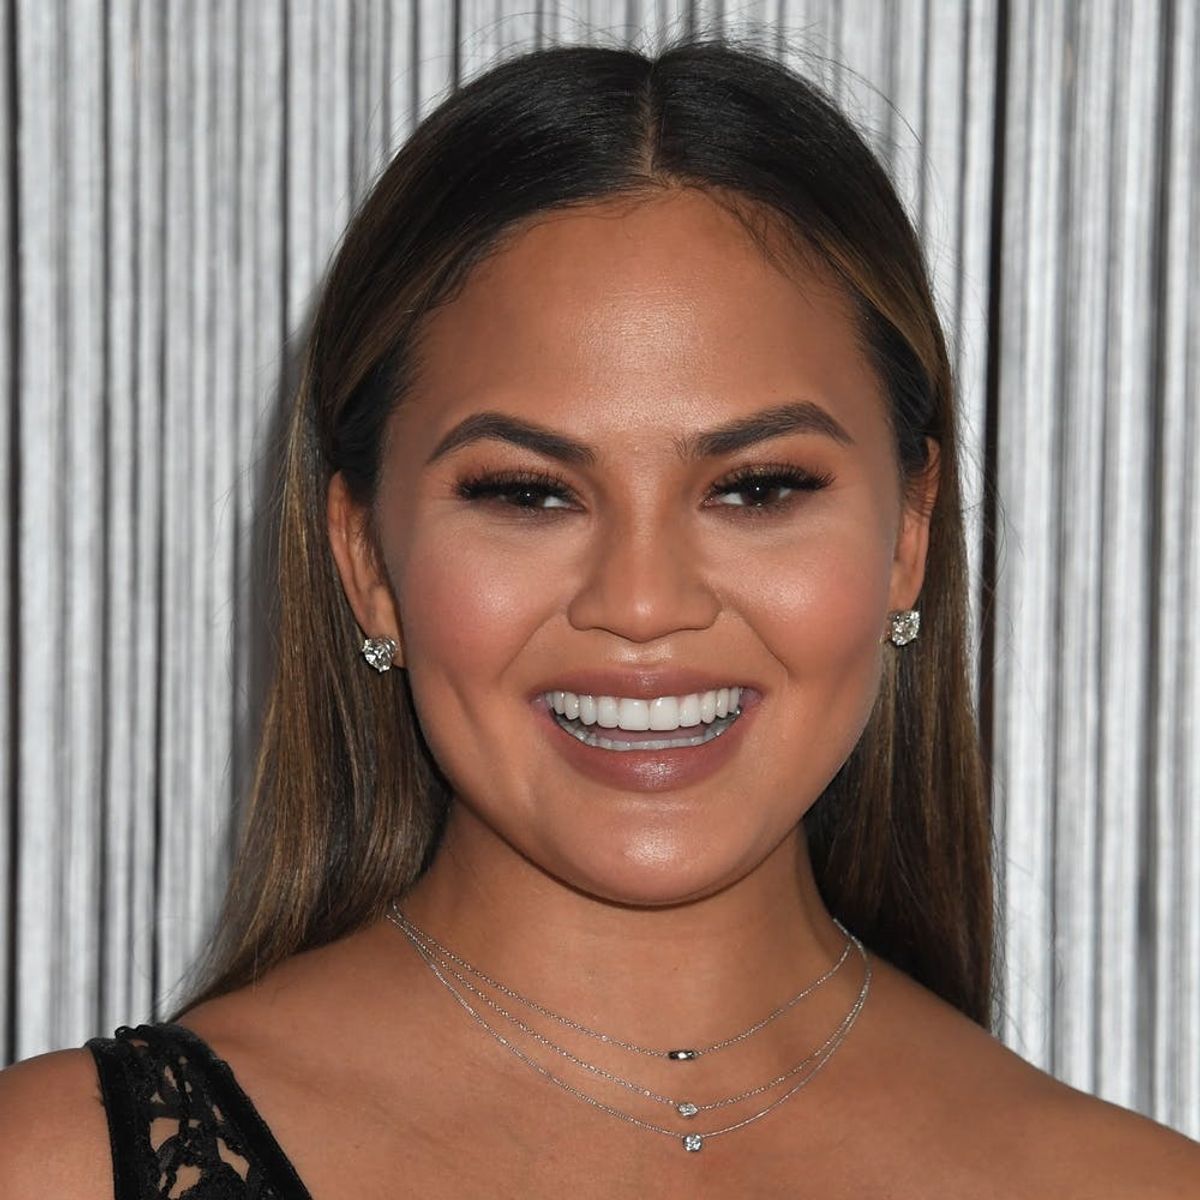 Chrissy Teigen Once Again Proves She’s a Cool Mom by Letting Luna Get Her Ears Pierced… Whenever She Wants